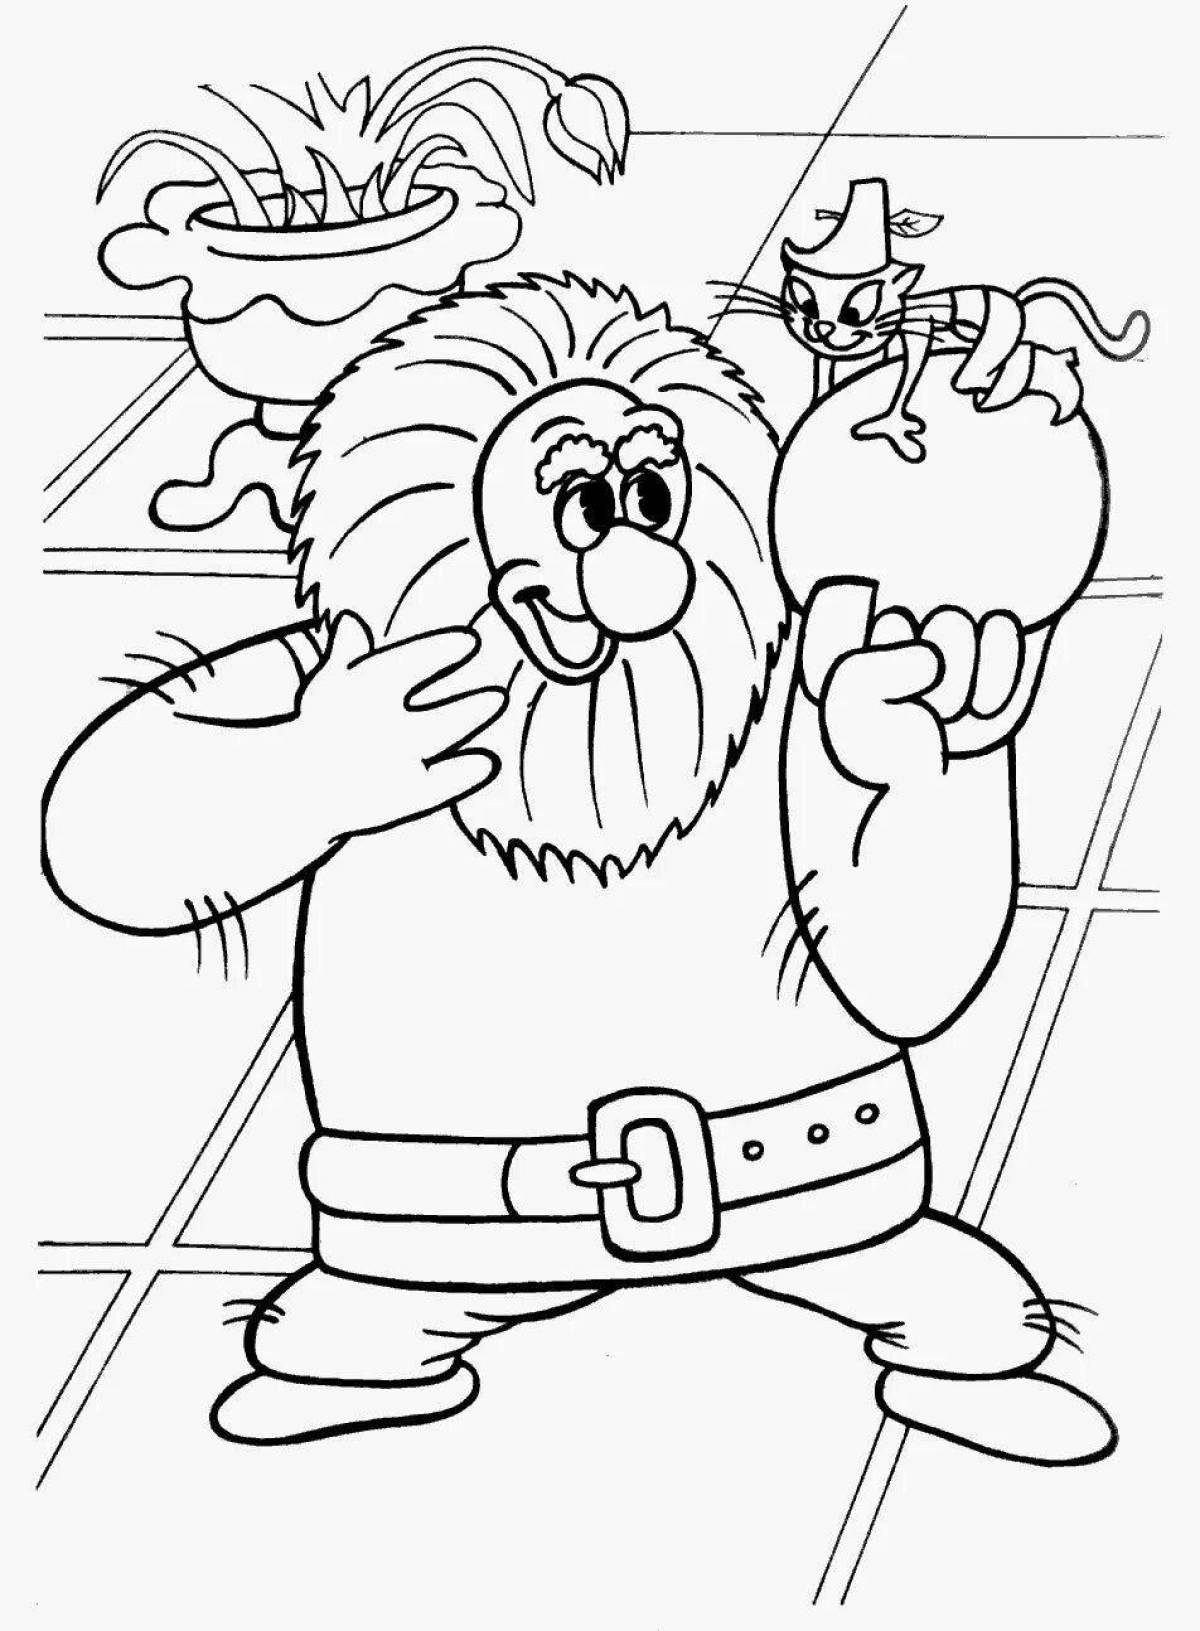 Coloring page dazzling cannibal